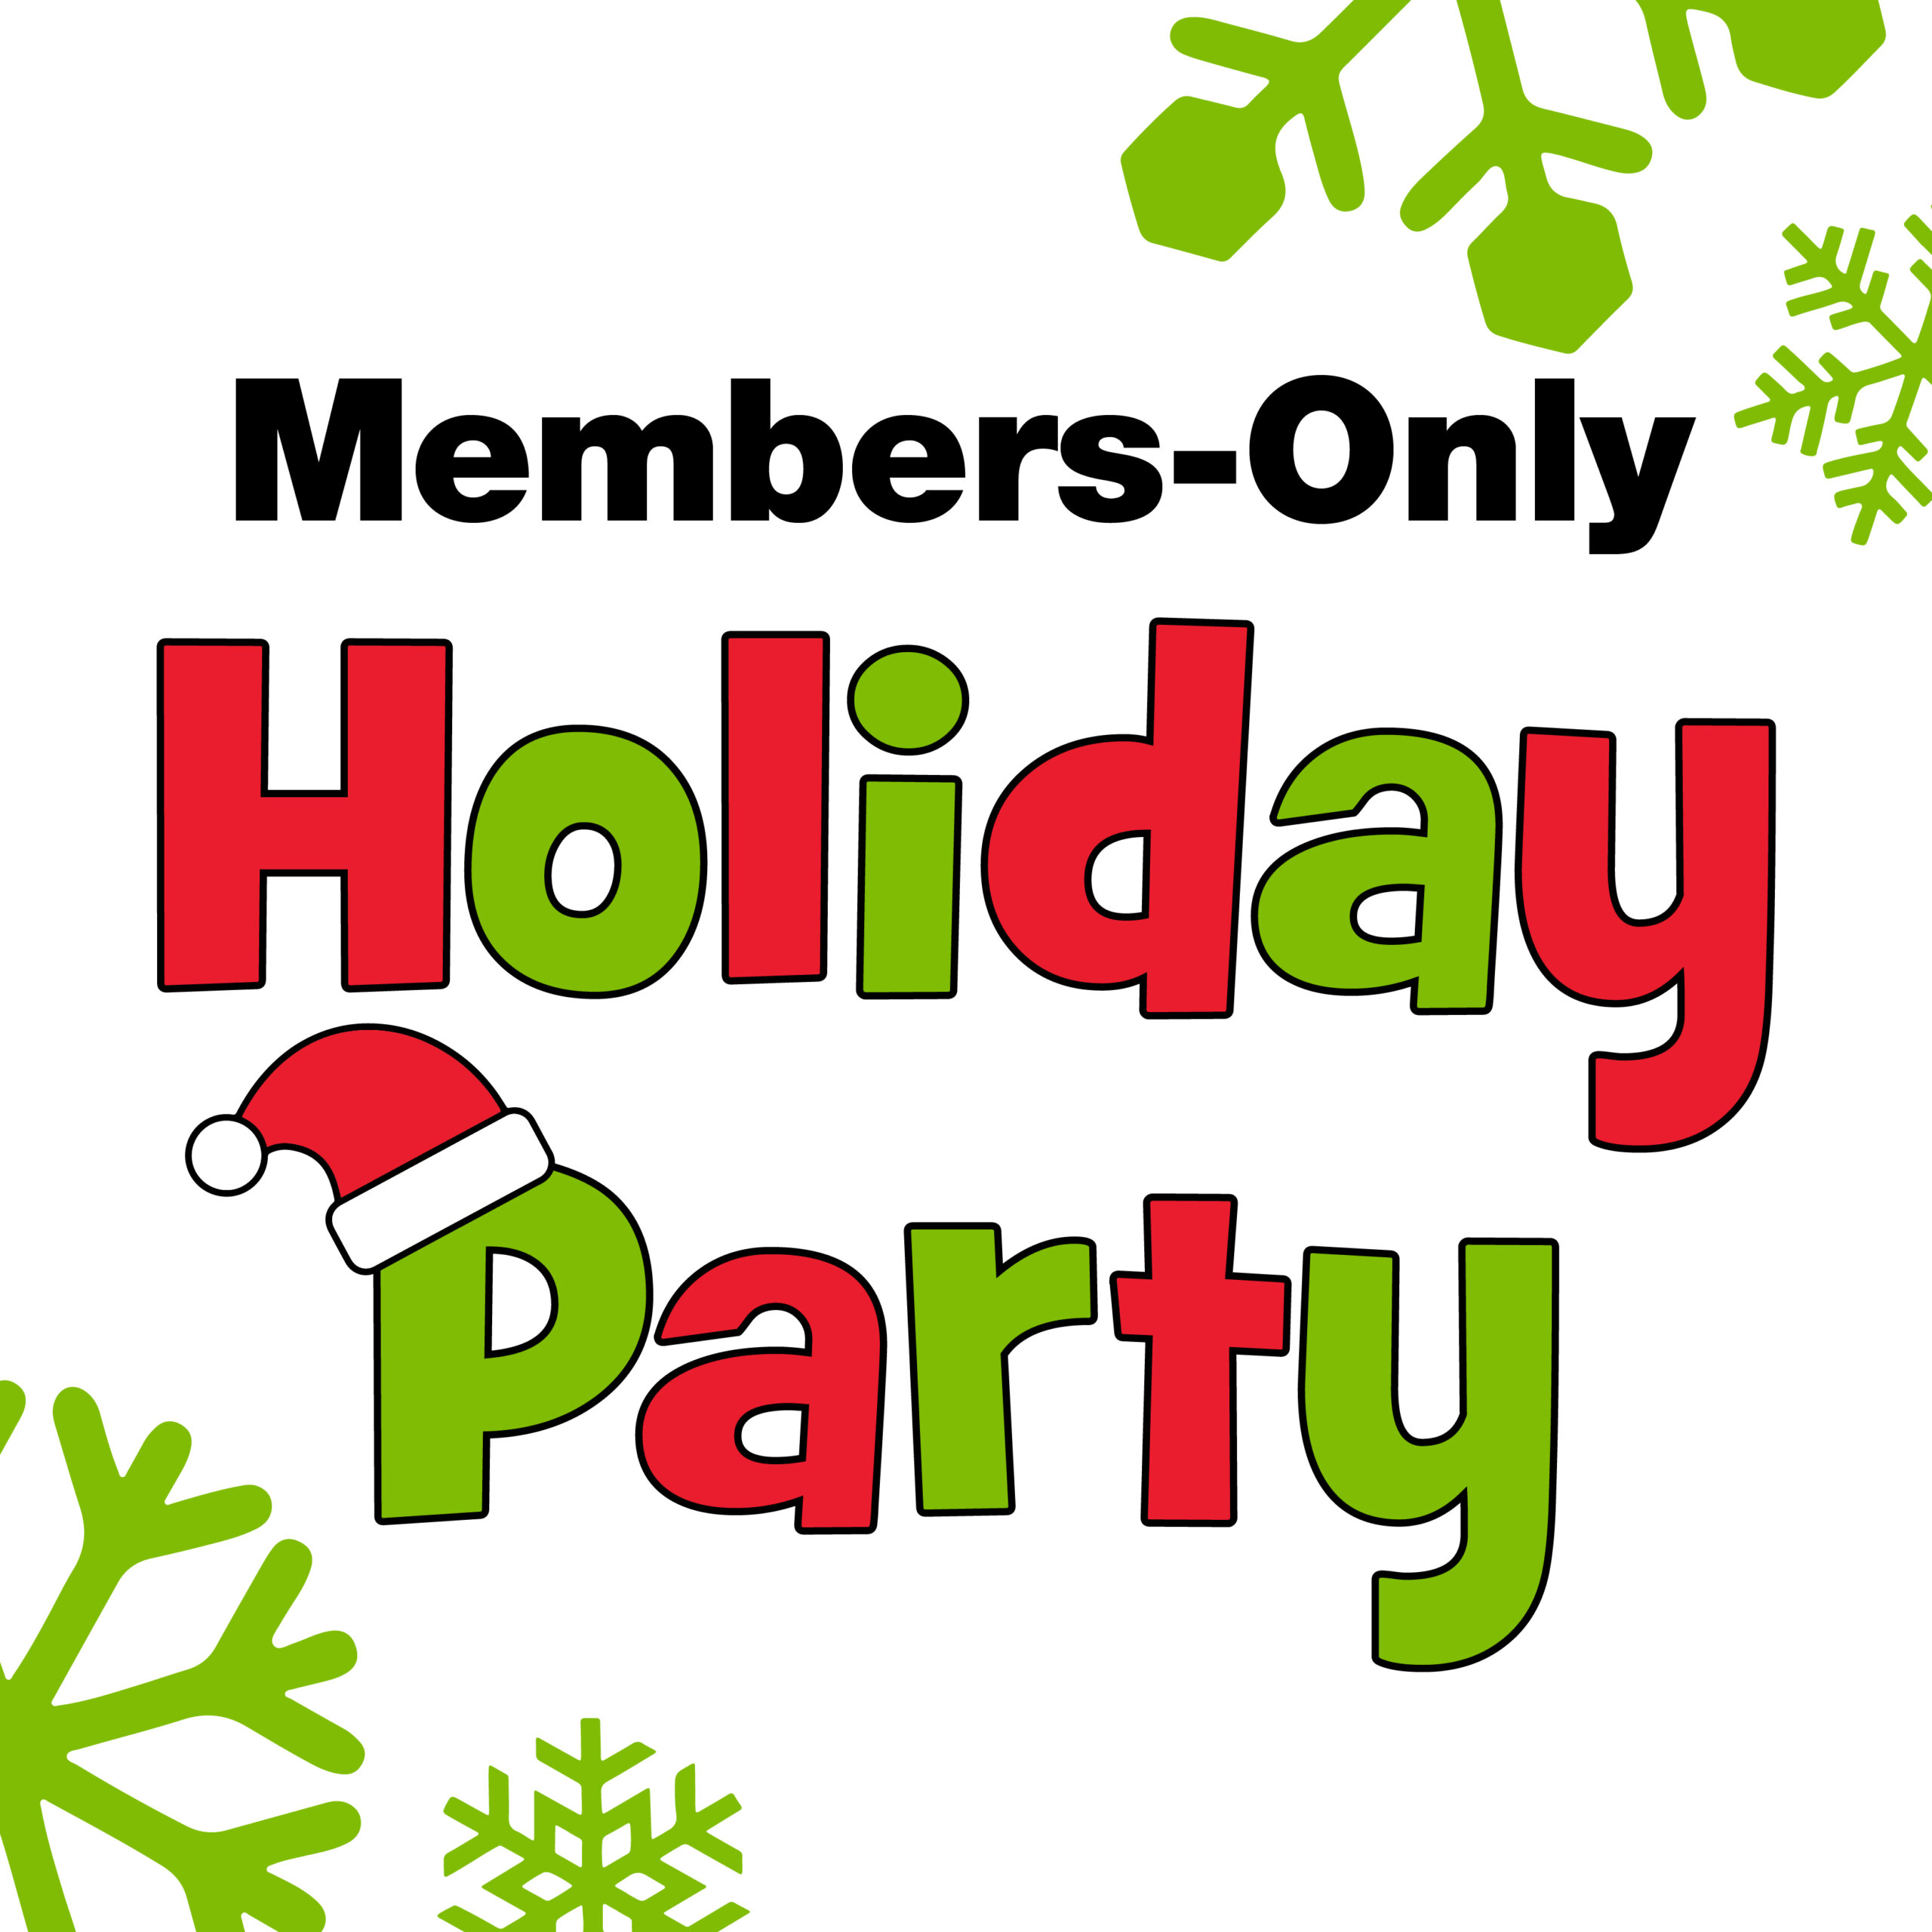 Members-Only Holiday Party